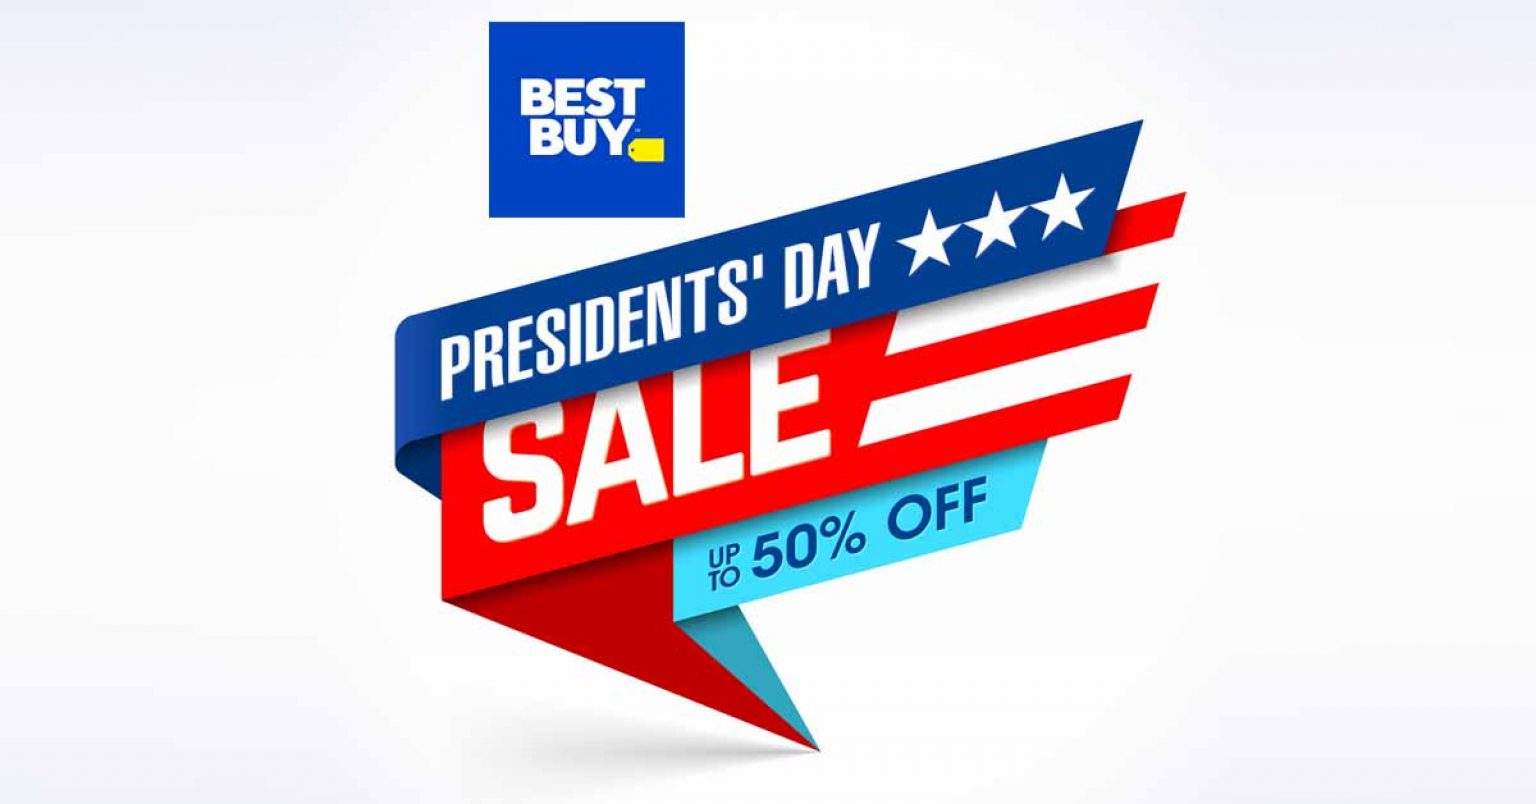 Best Buy Presidents Day Sale 2022 Up to 50 OFF, Save 400